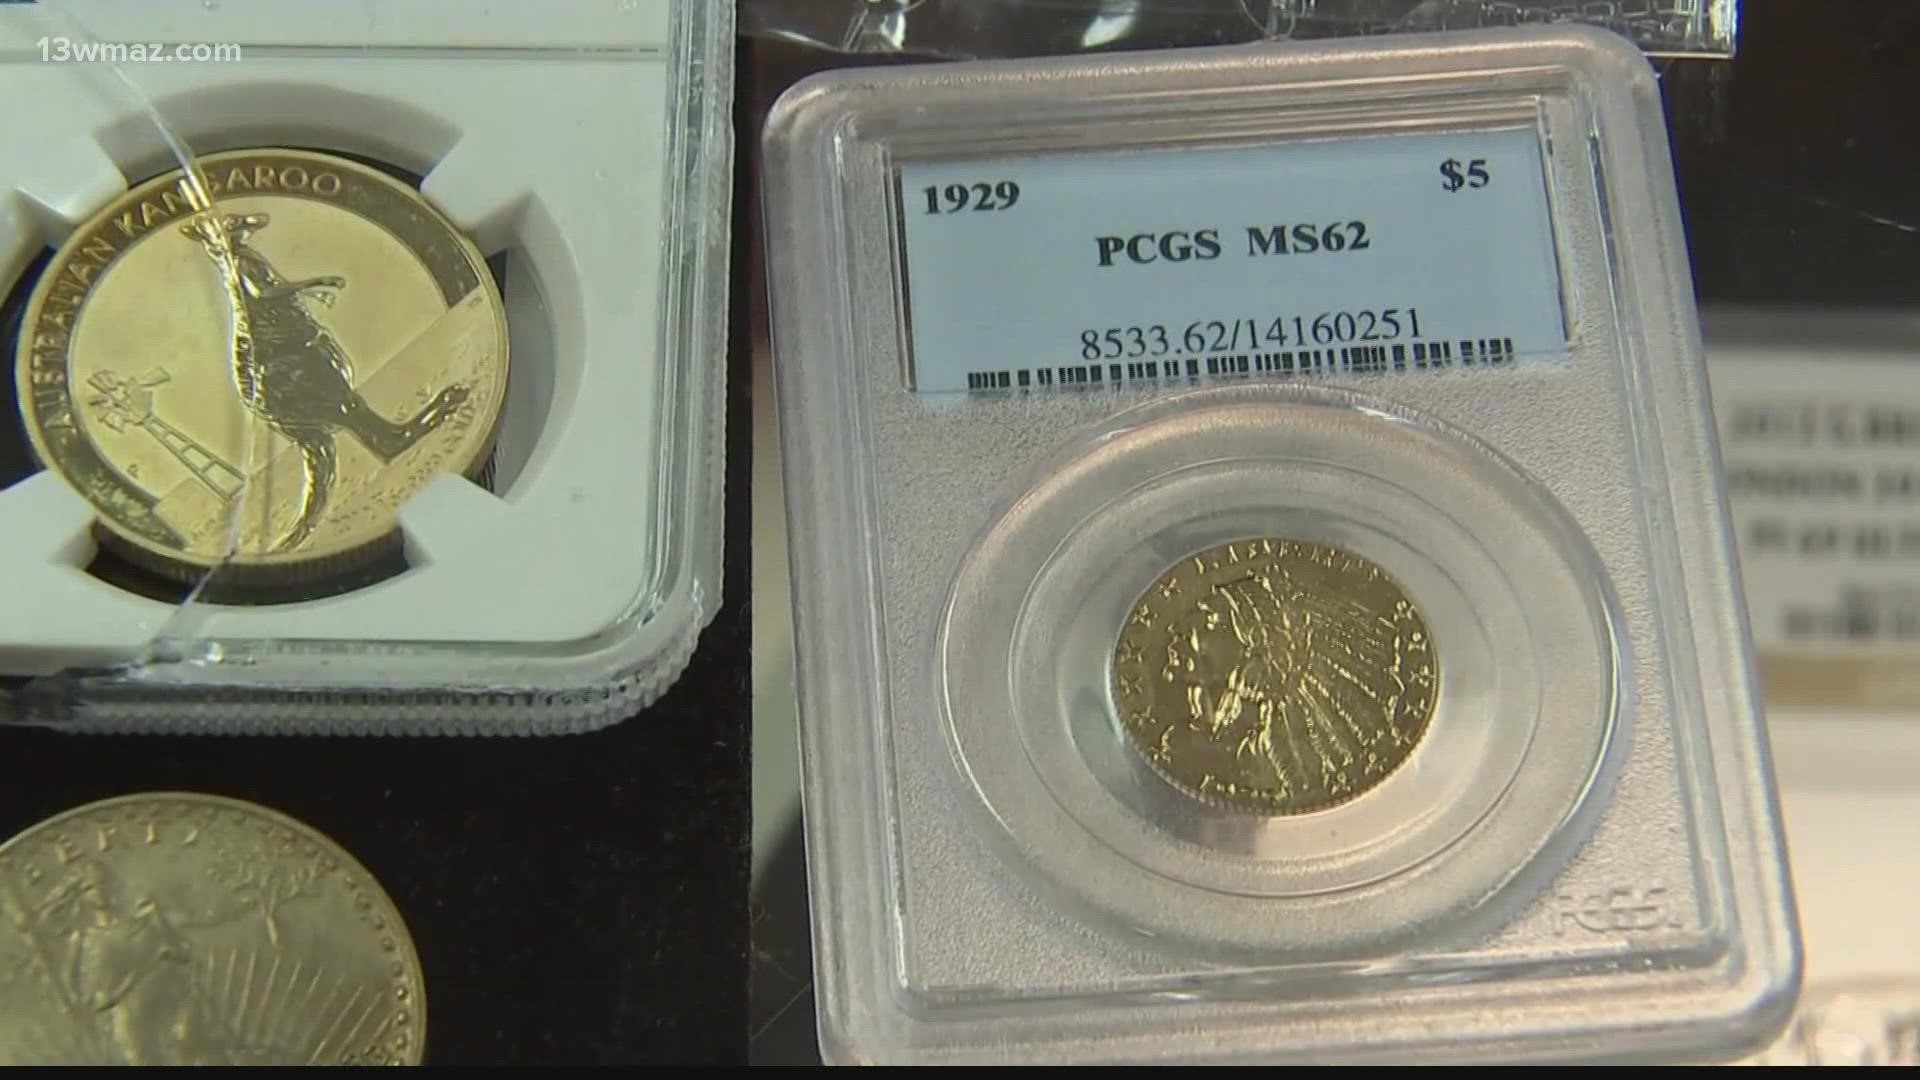 Do you enjoy collecting coins?  Buyer beware... there are counterfeit coins on the market that can cost you a lot more than just a little change